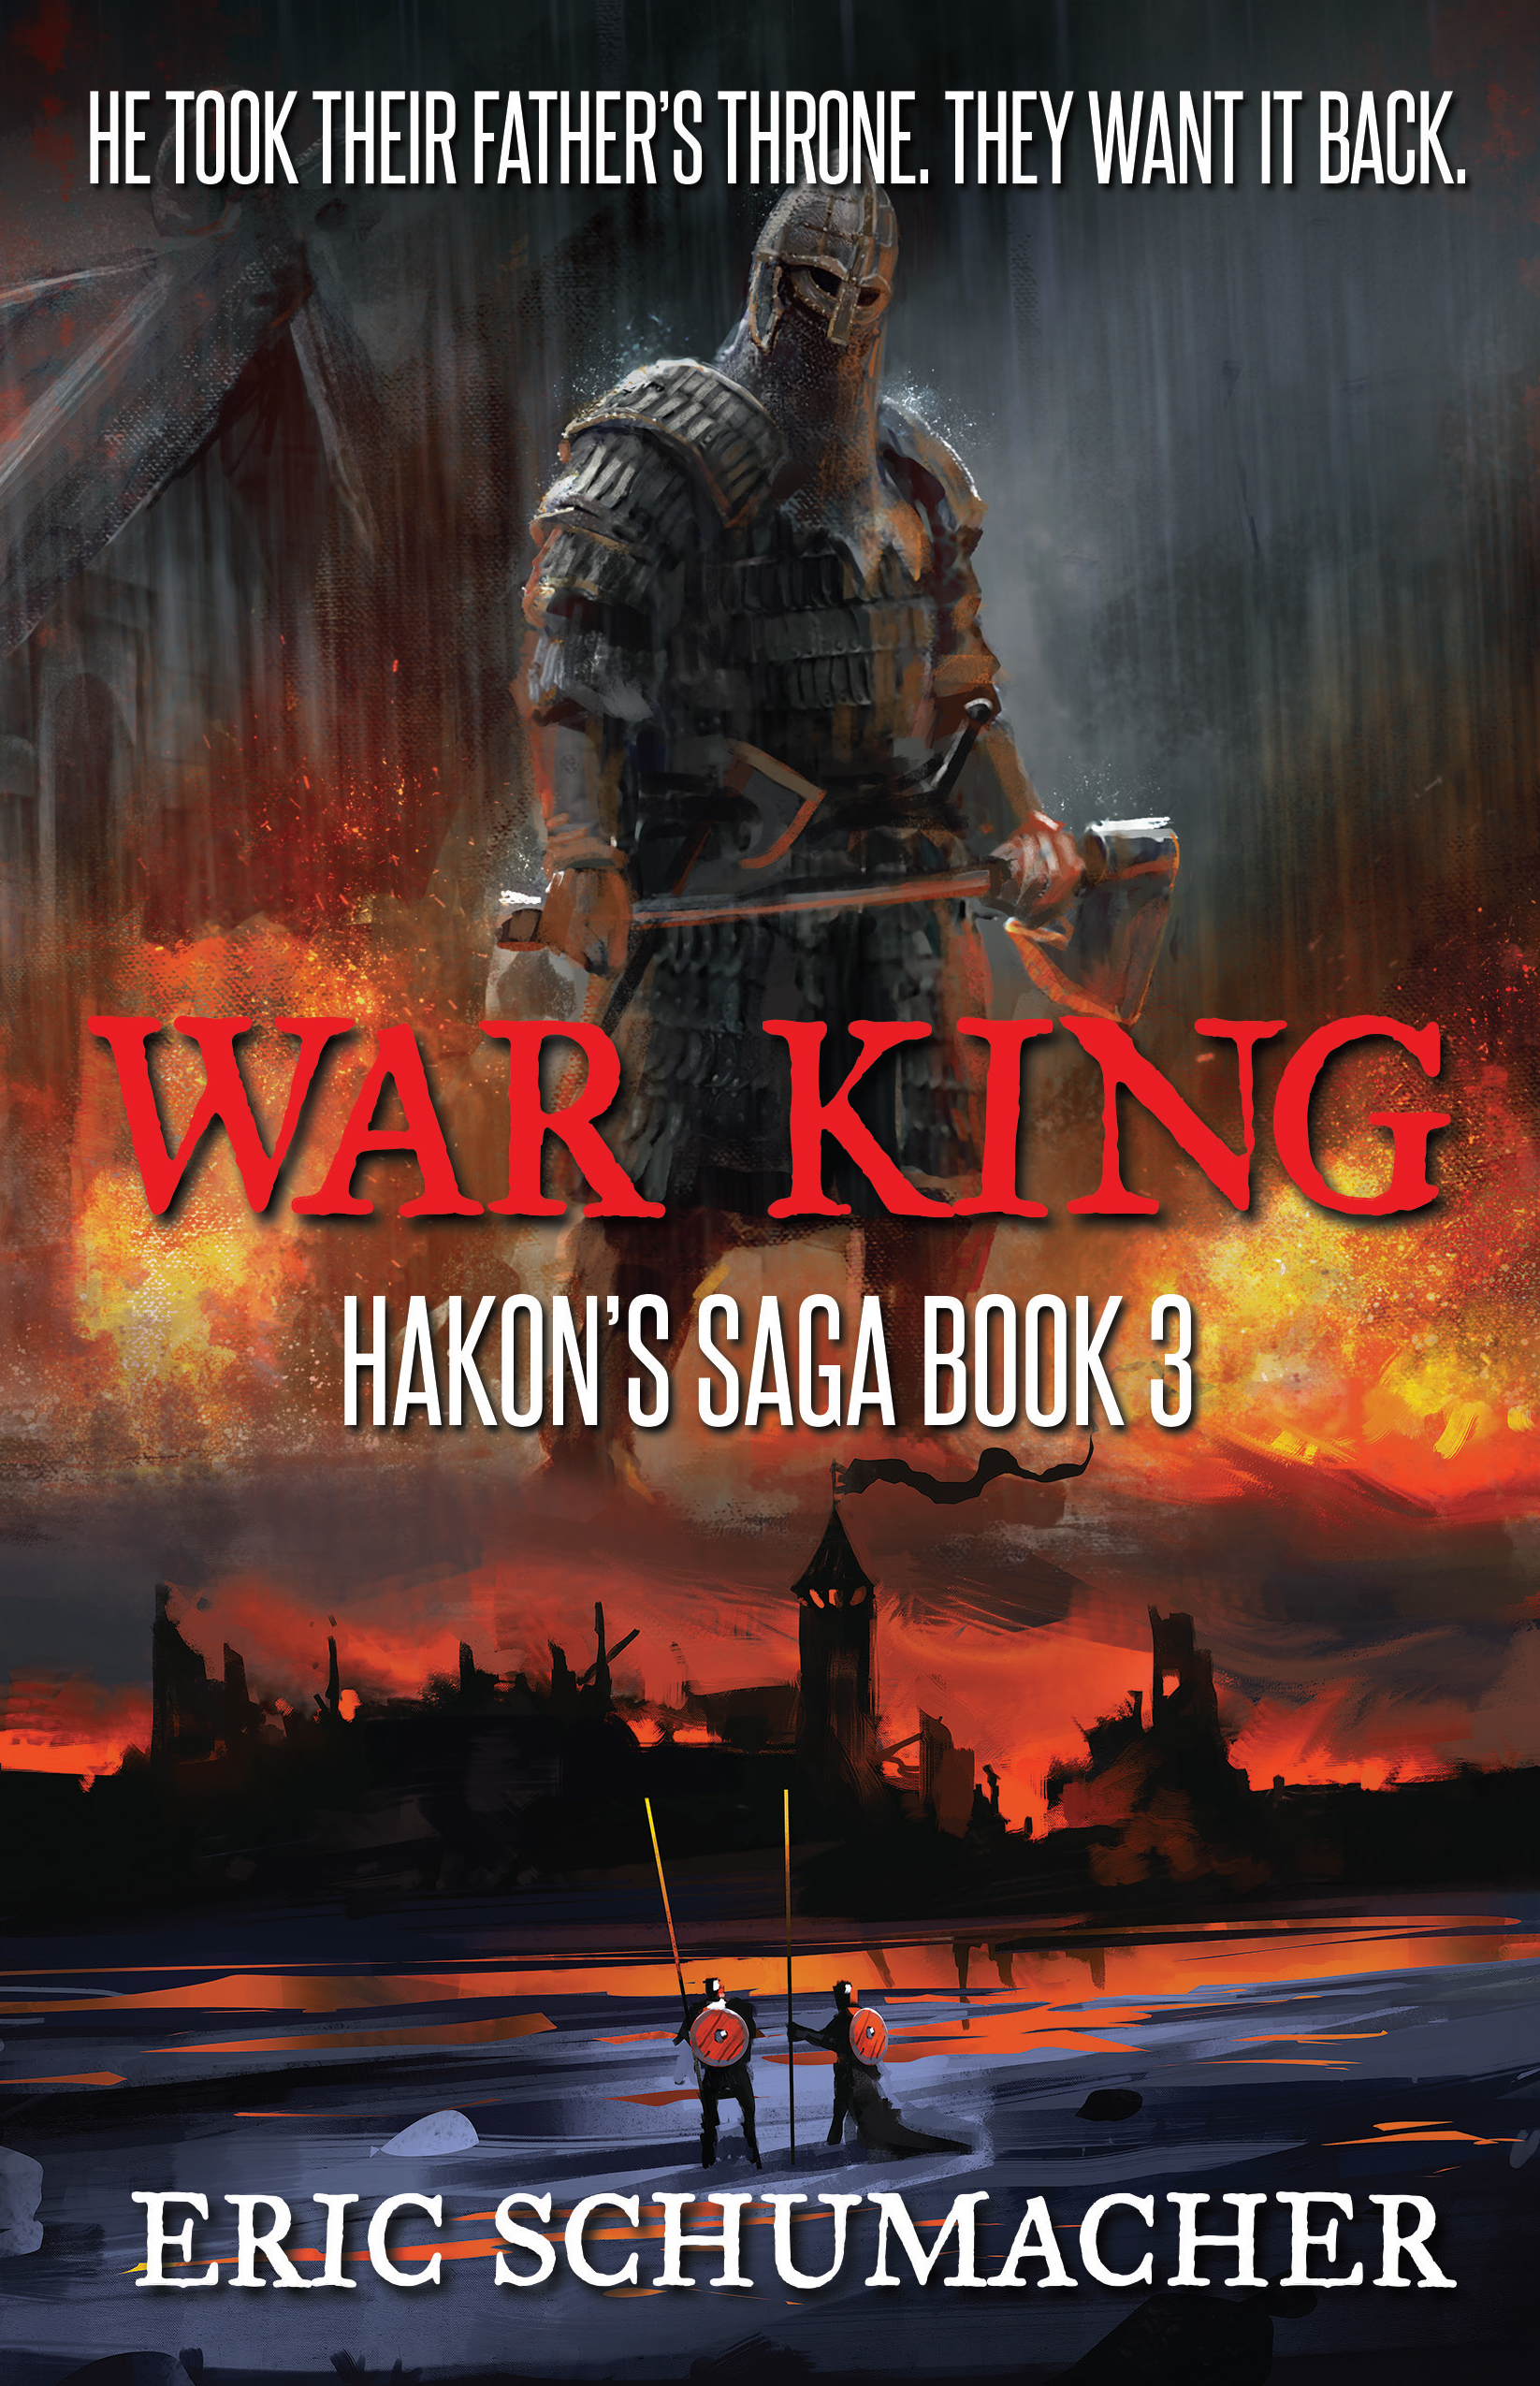 Cover of War King. Release date: Oct 15, 2018.